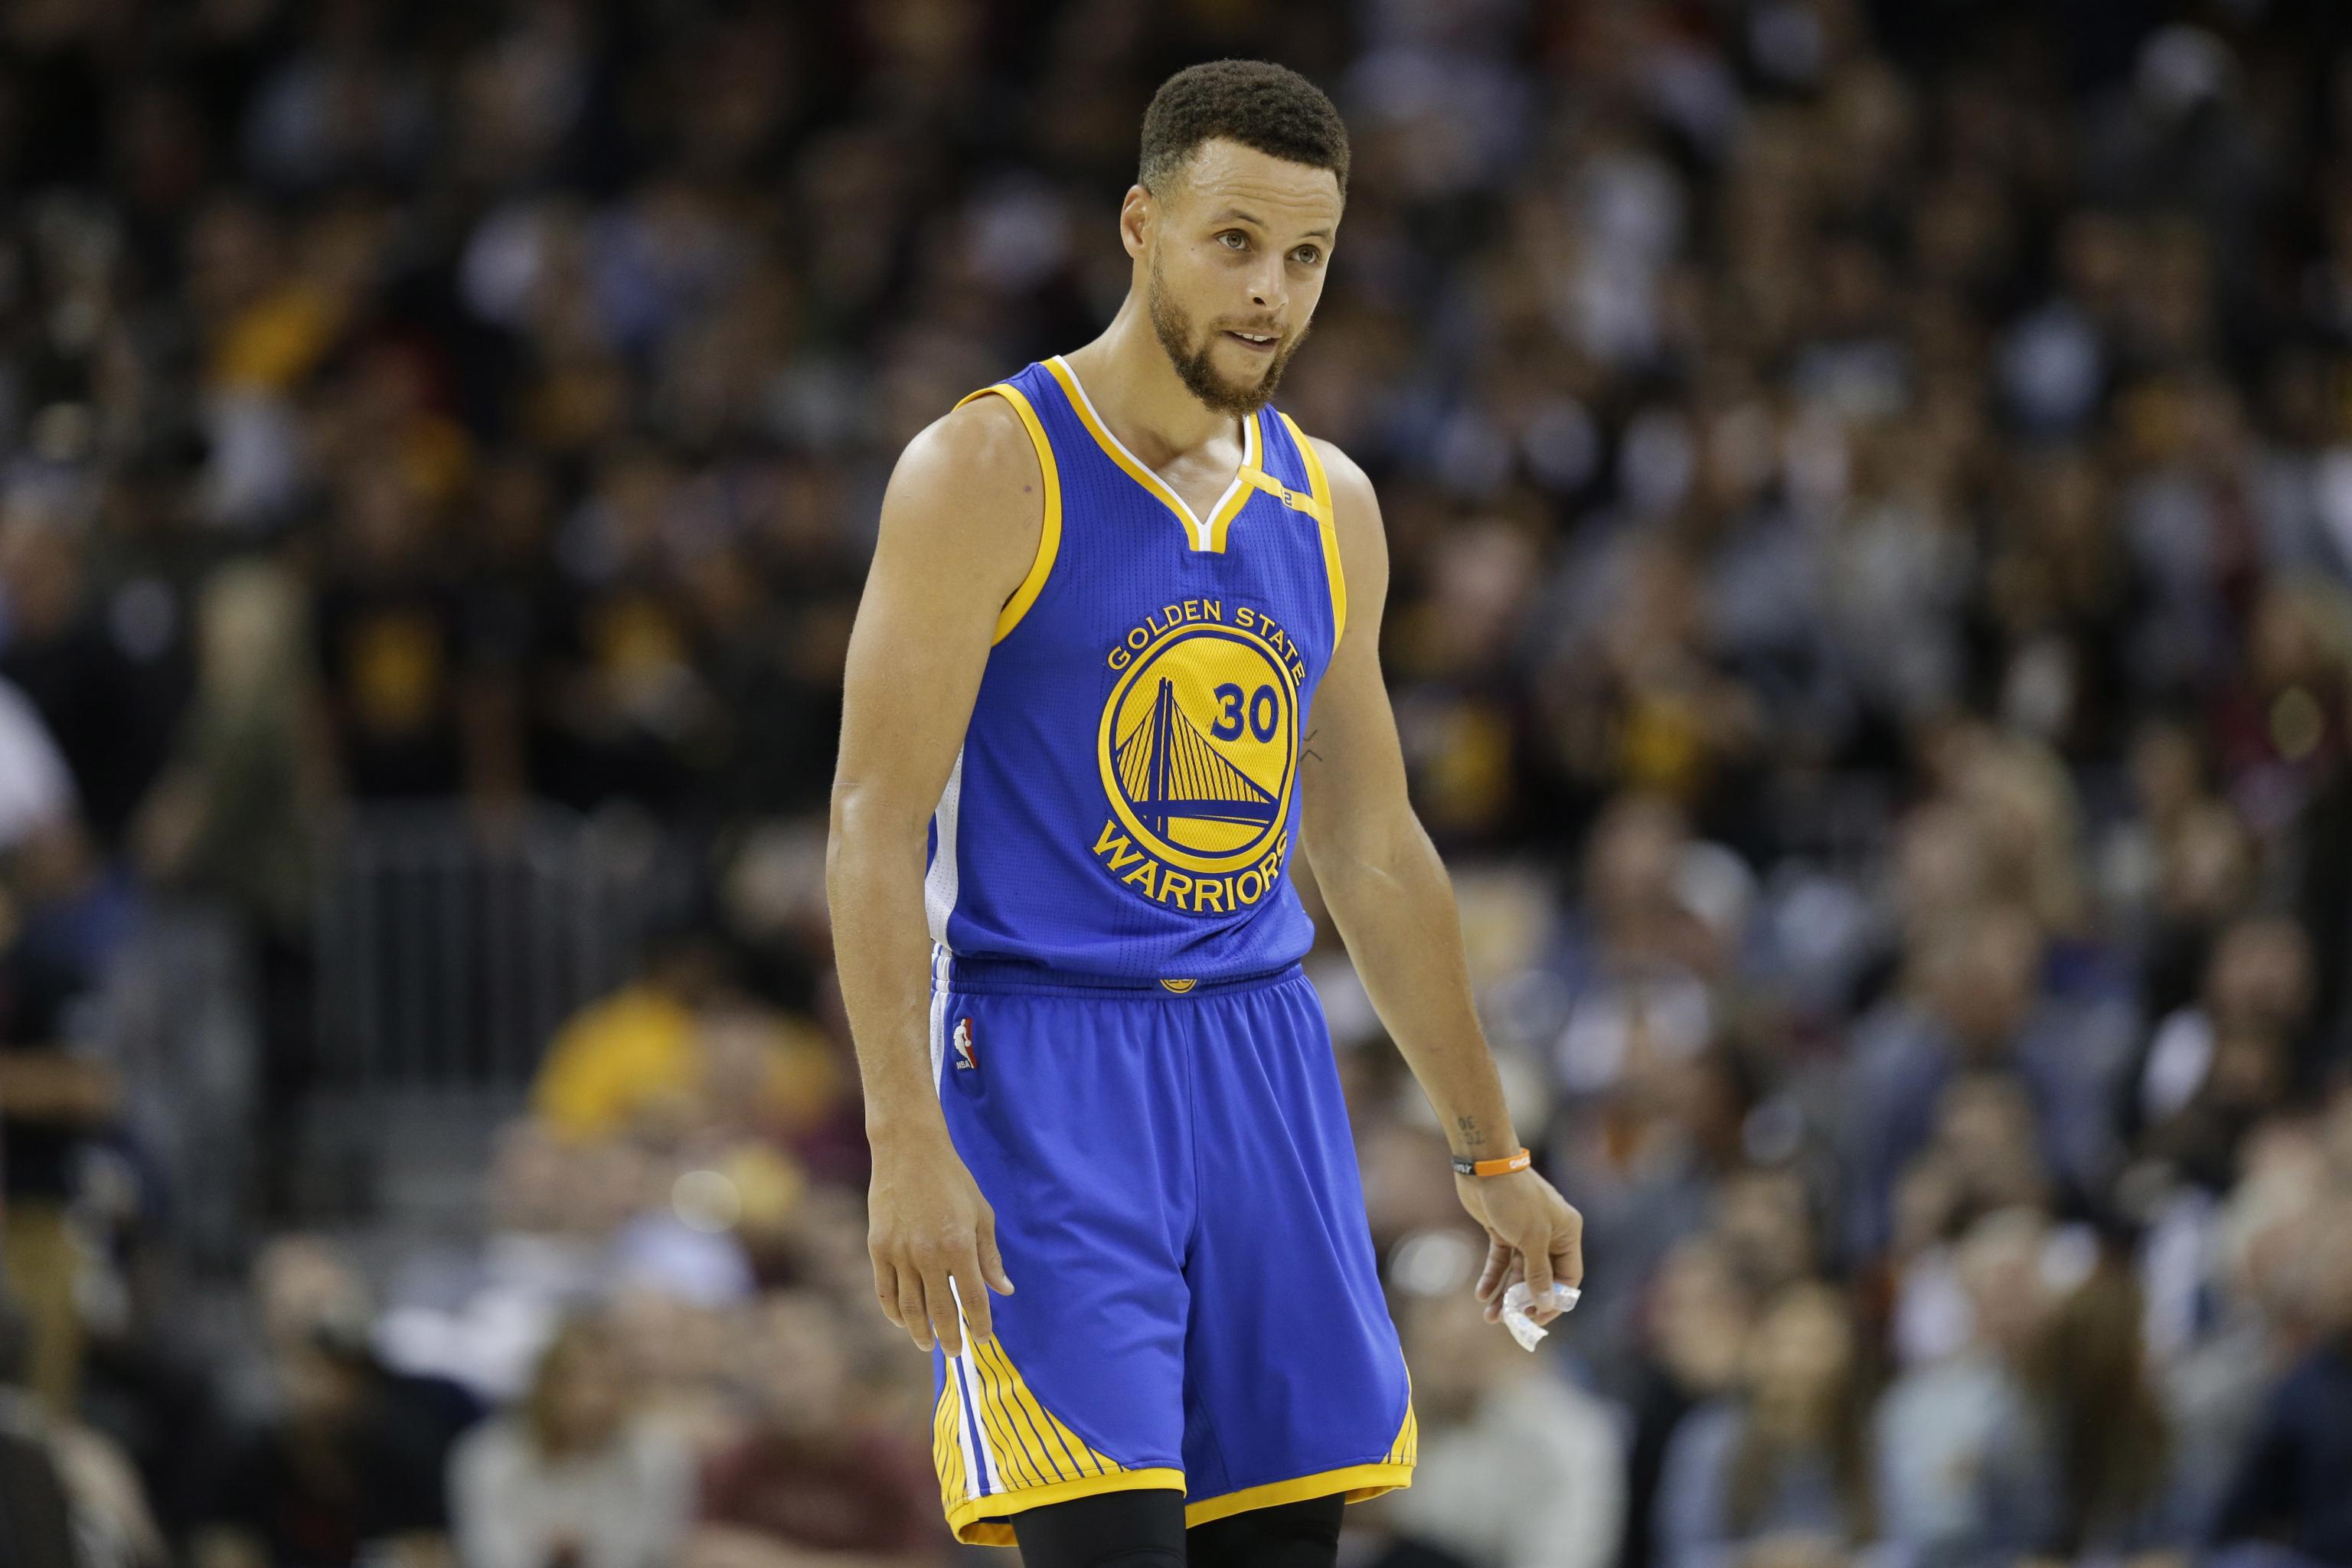 Steph Curry's All-Star Jersey Sells for $500,720